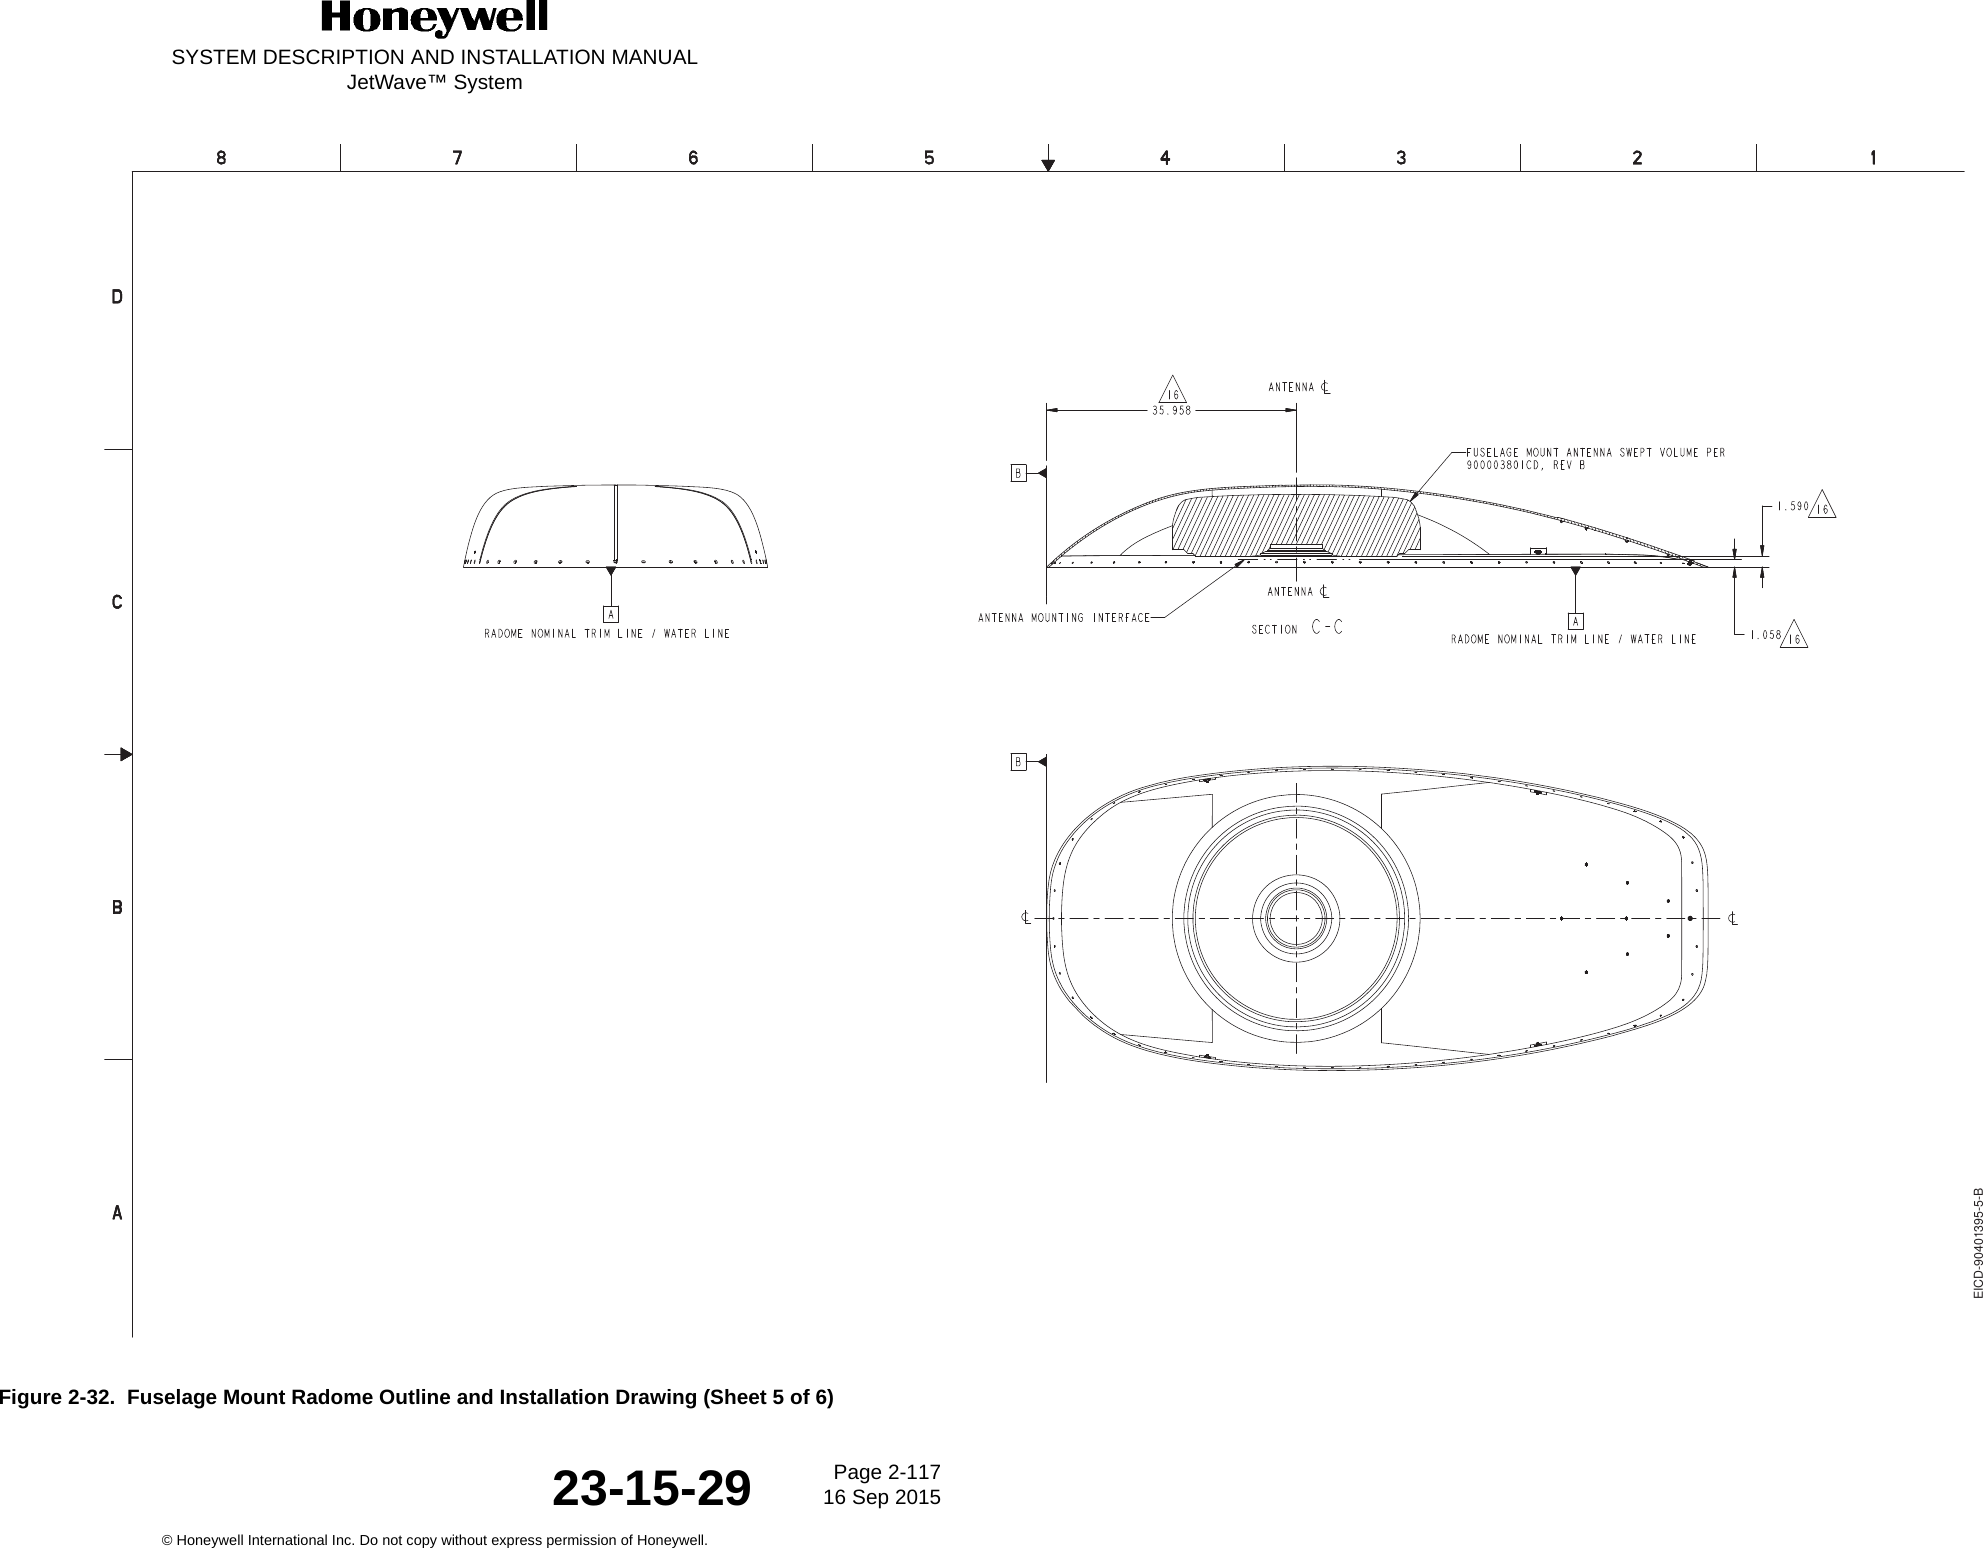 SYSTEM DESCRIPTION AND INSTALLATION MANUALJetWave™ SystemPage 2-117 16 Sep 2015© Honeywell International Inc. Do not copy without express permission of Honeywell.23-15-29Figure 2-32.  Fuselage Mount Radome Outline and Installation Drawing (Sheet 5 of 6) EICD-90401395-5-B